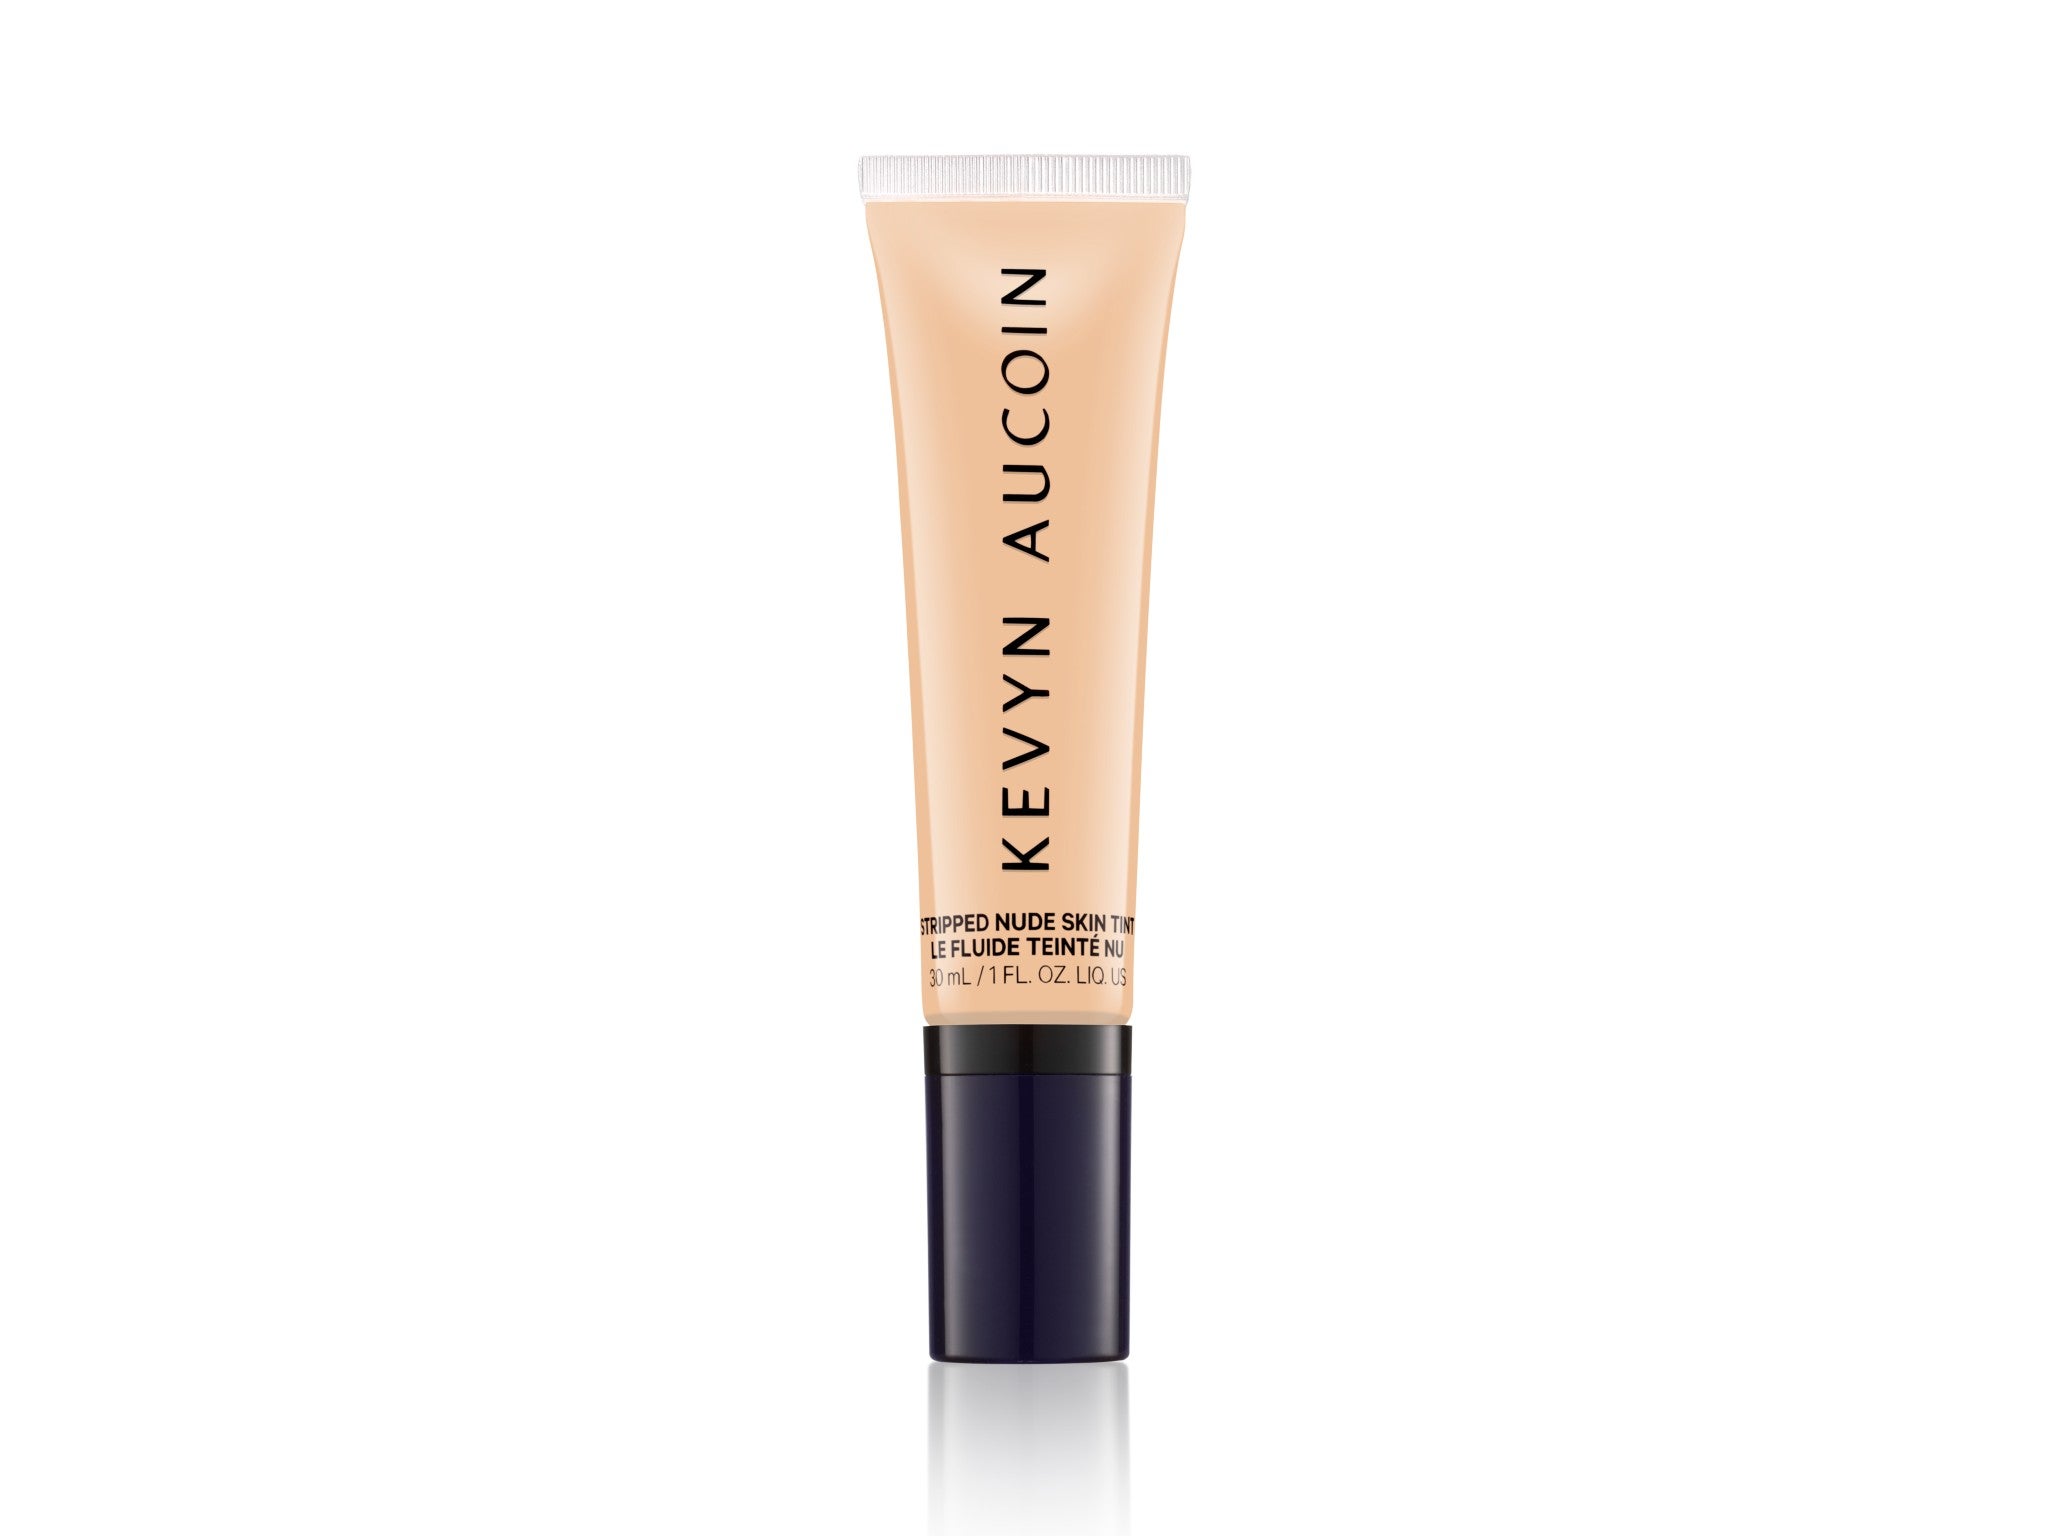 Kevyn Aucoin stripped nude skin tint indybest.jpg